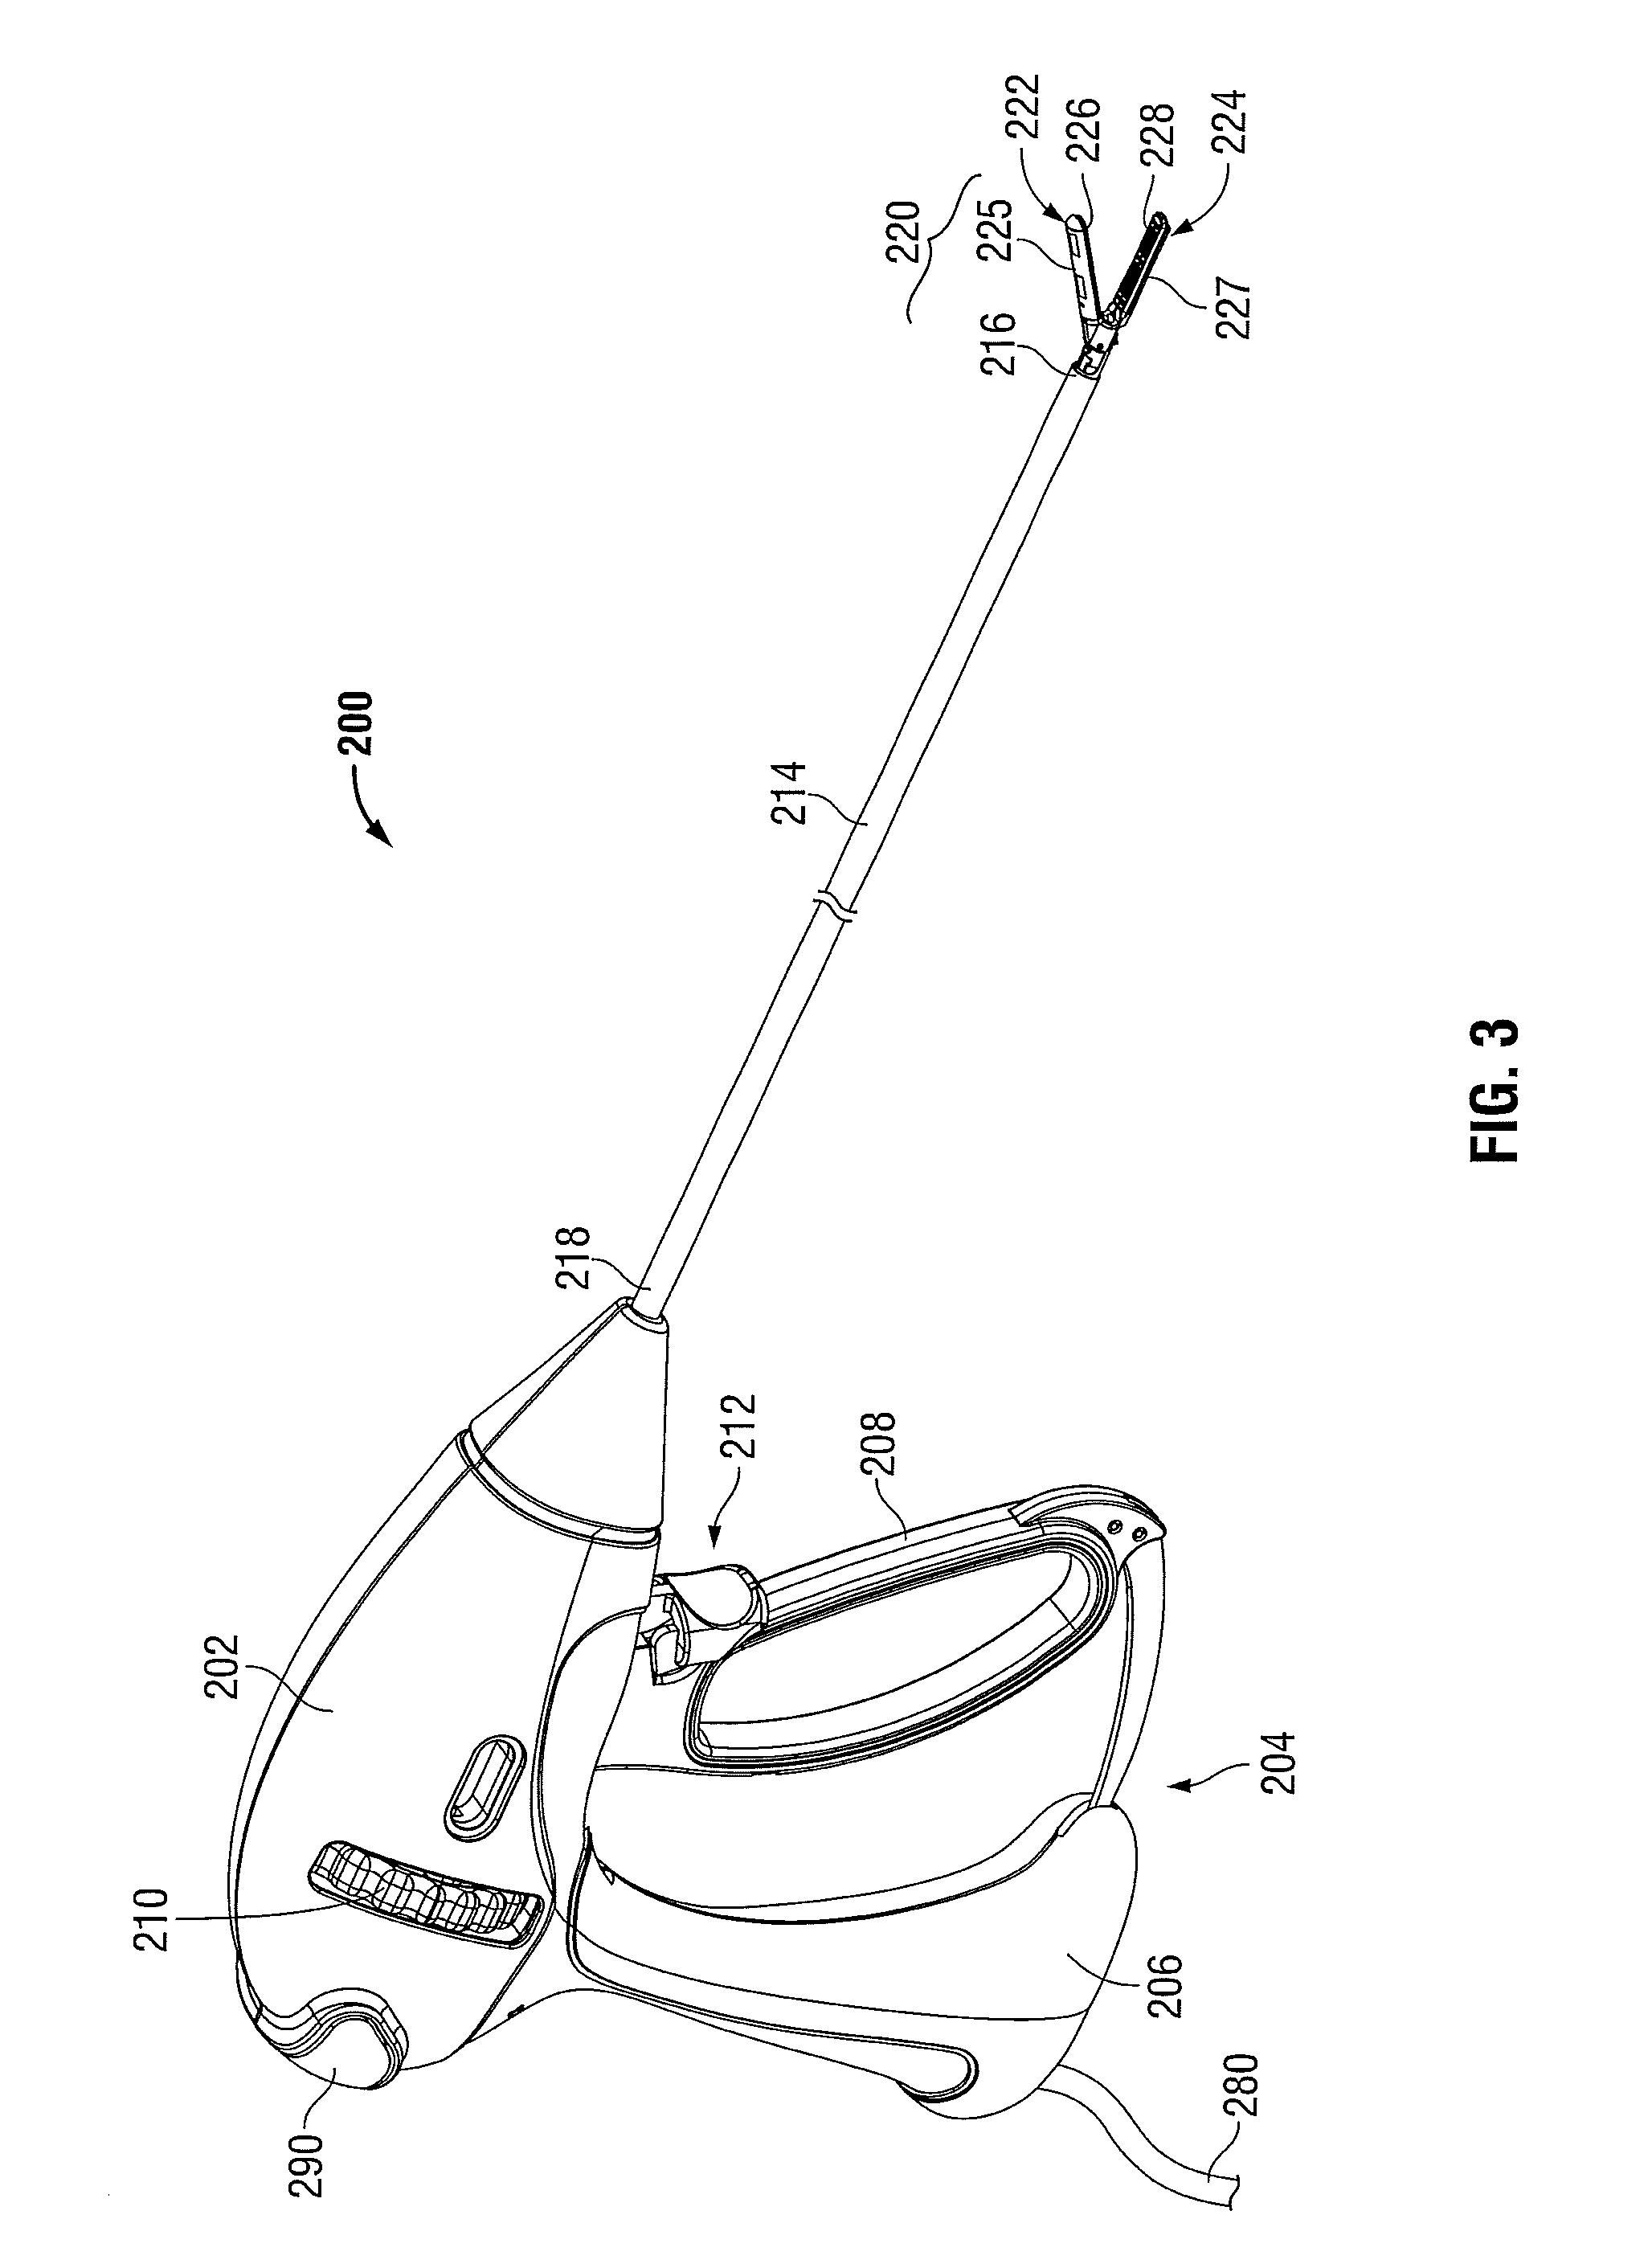 Methods of manufacturing end effectors for energy-based surgical instruments